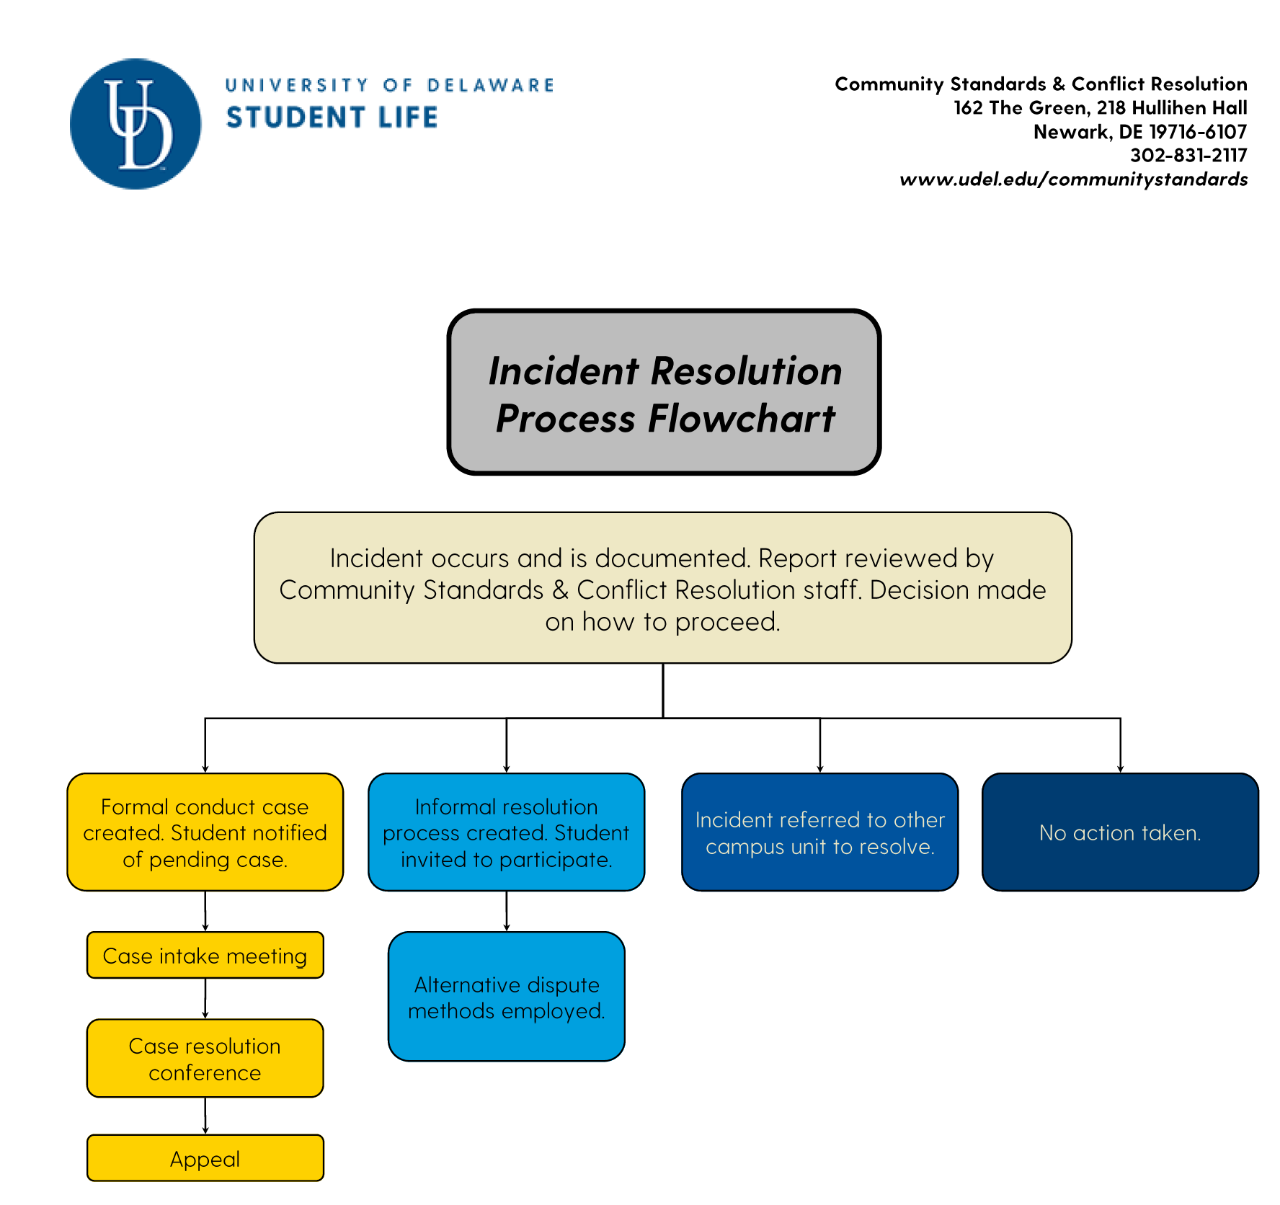 Flowchart of the Incident Resolution Process showing four options: Formal conduct case, informal resolution, referral to other campus unit for resolution, or no action taken.